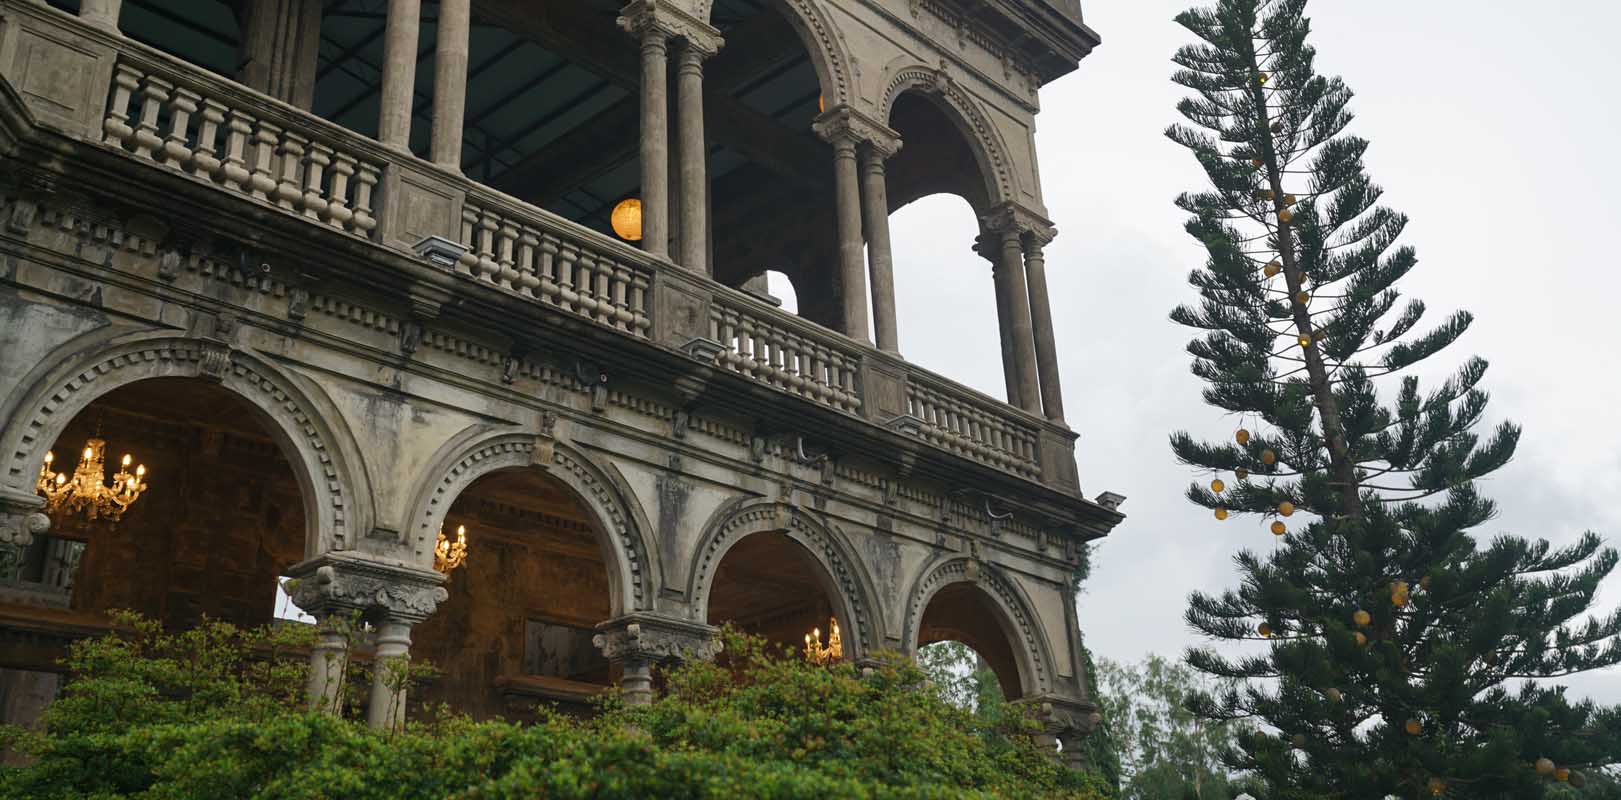 Discover Bacolod - The Ruins